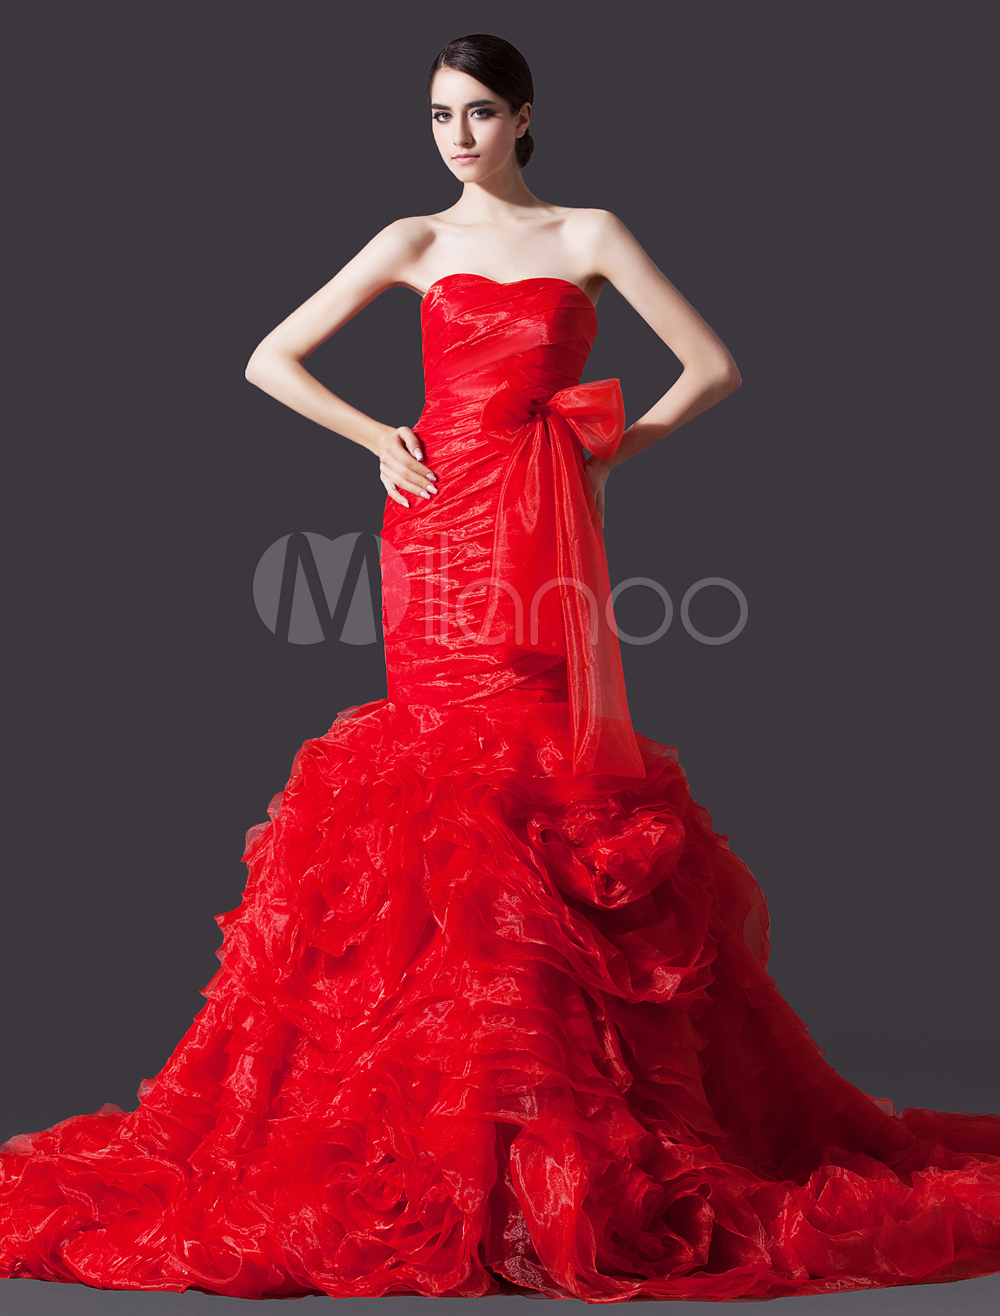 Red Mermaid Sweetheart Neck Strapless Ruched Bridal Wedding Gown (Red Wedding Dress) photo